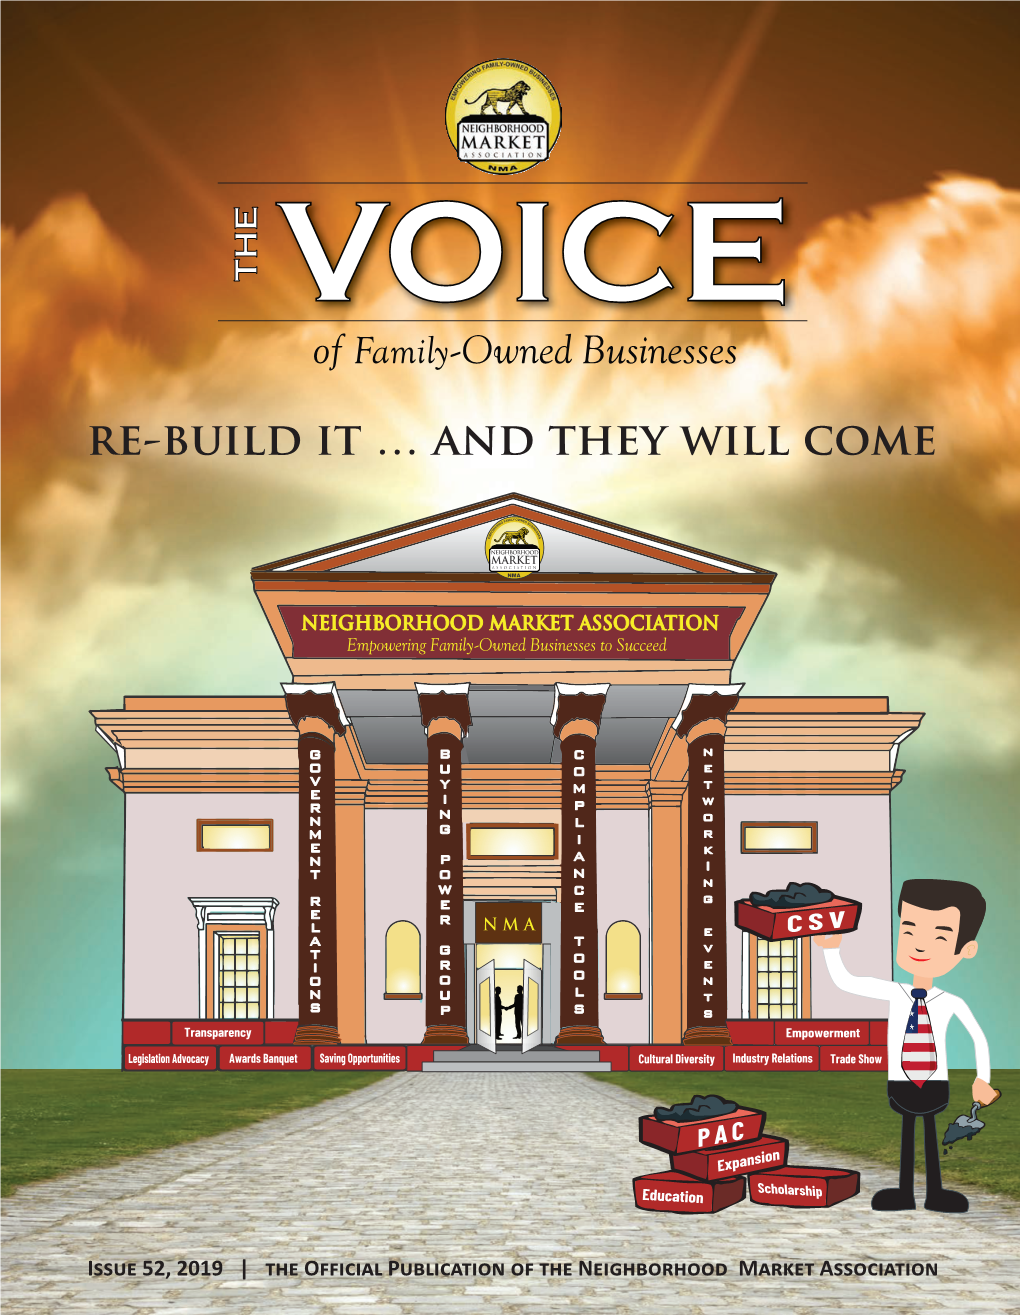 THE VOICE of Family-Owned Businesses , Issue 52 2019